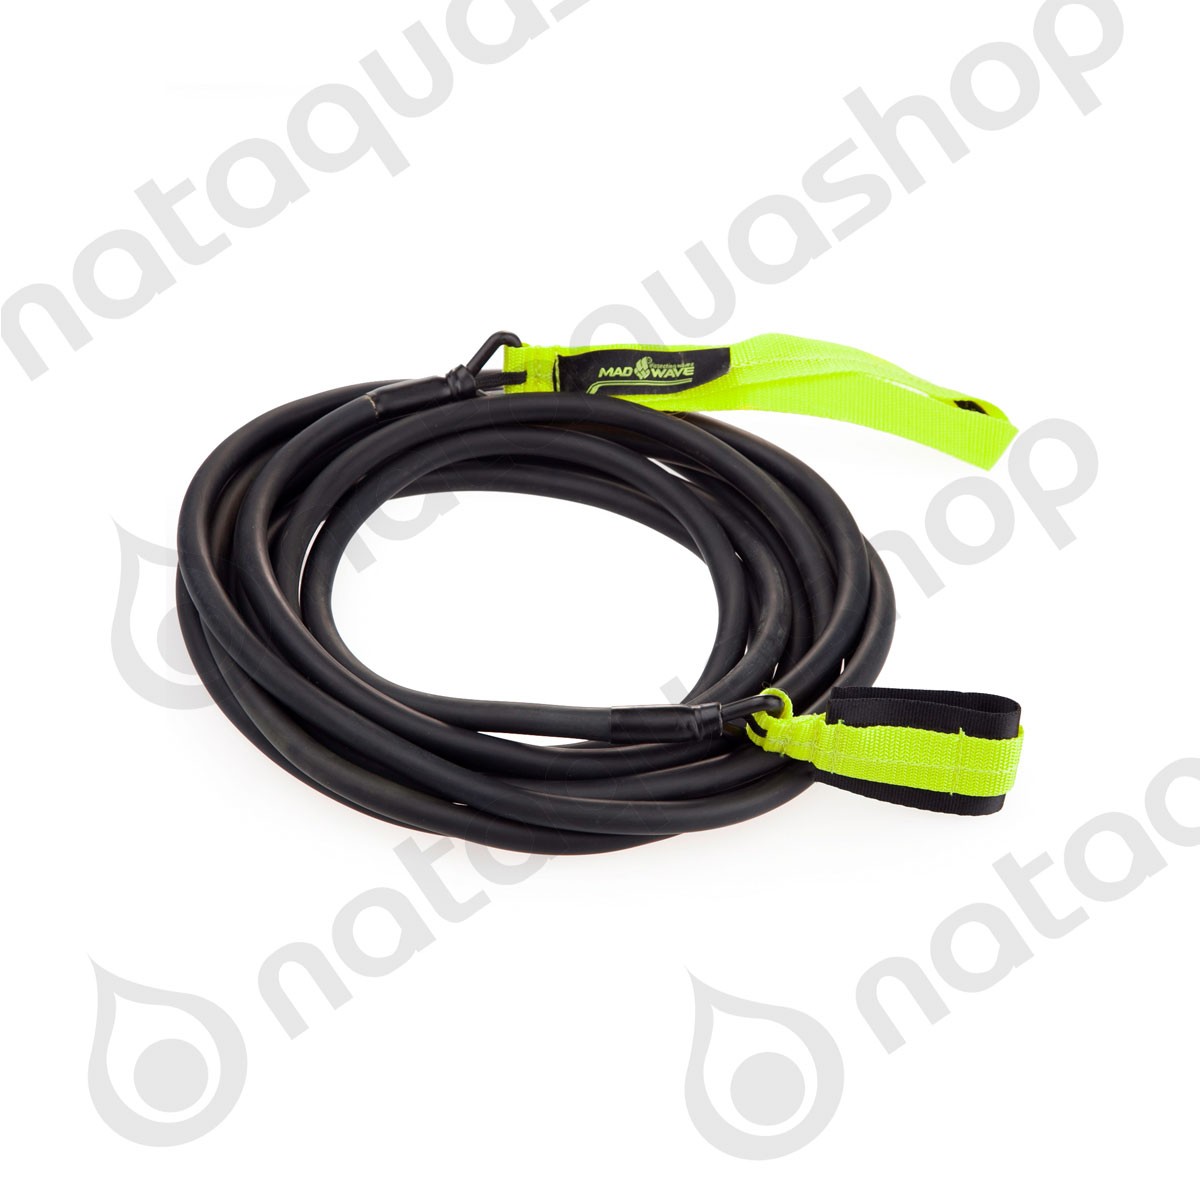 LONG SAFETY CORD couleurs